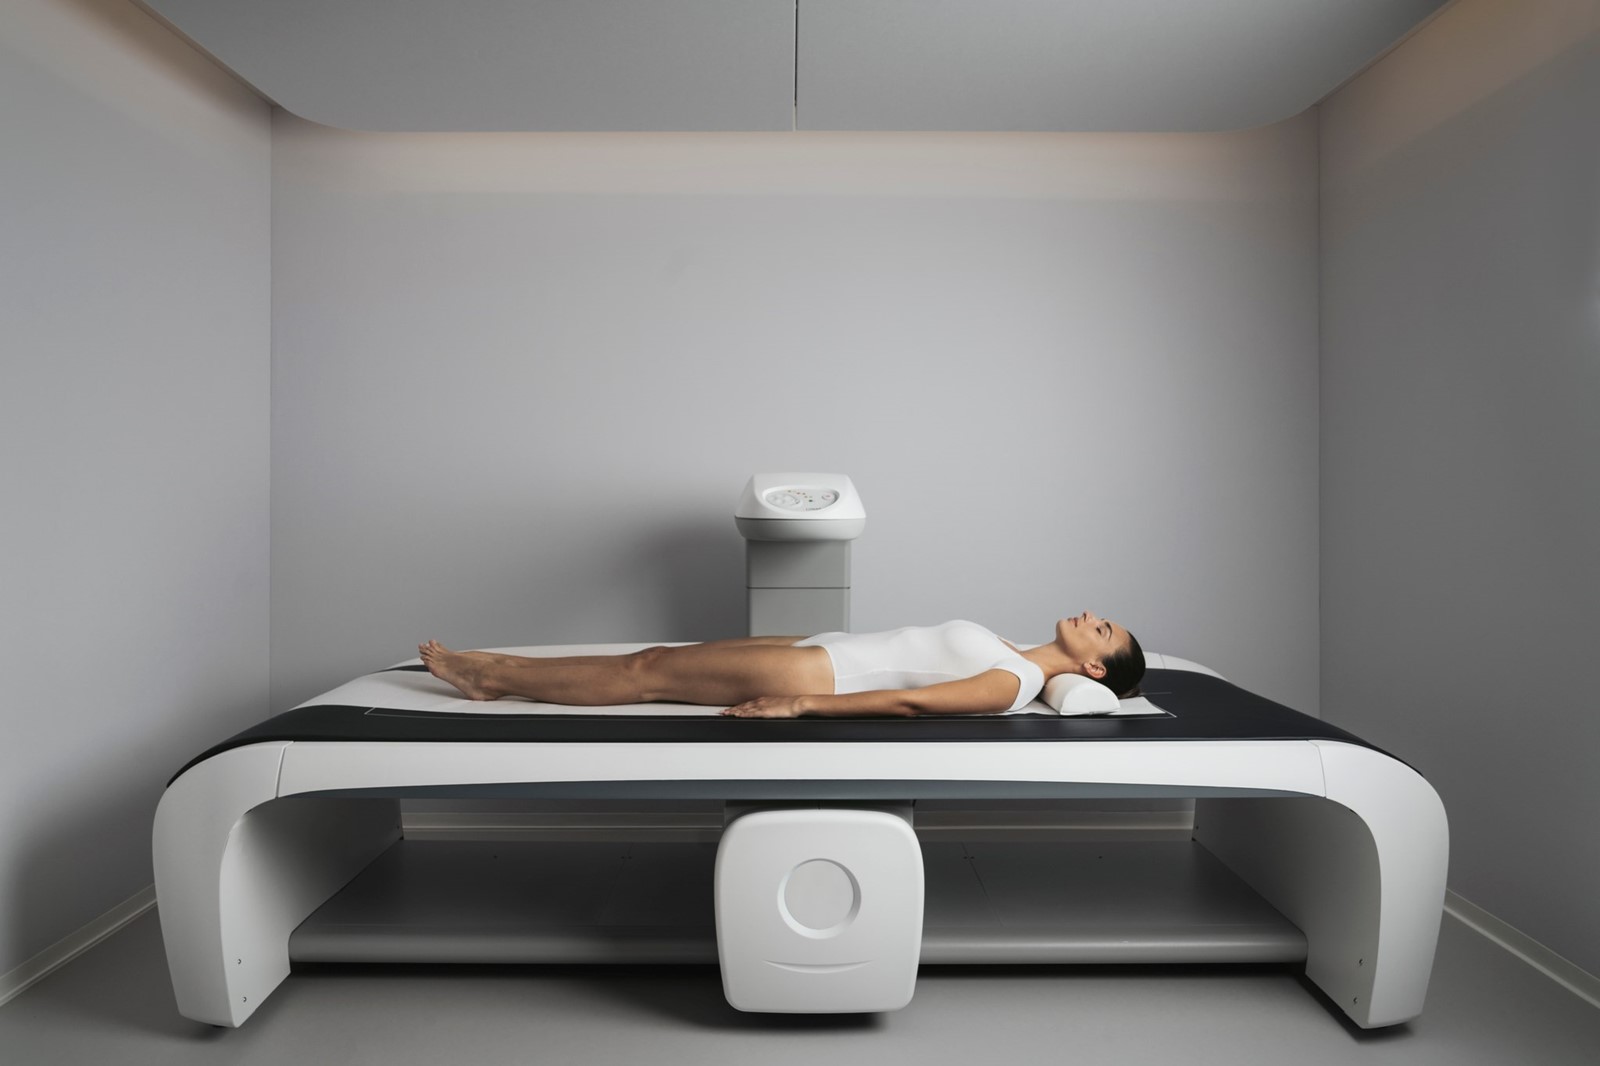 ‘Body composition analysis’ at Chenot